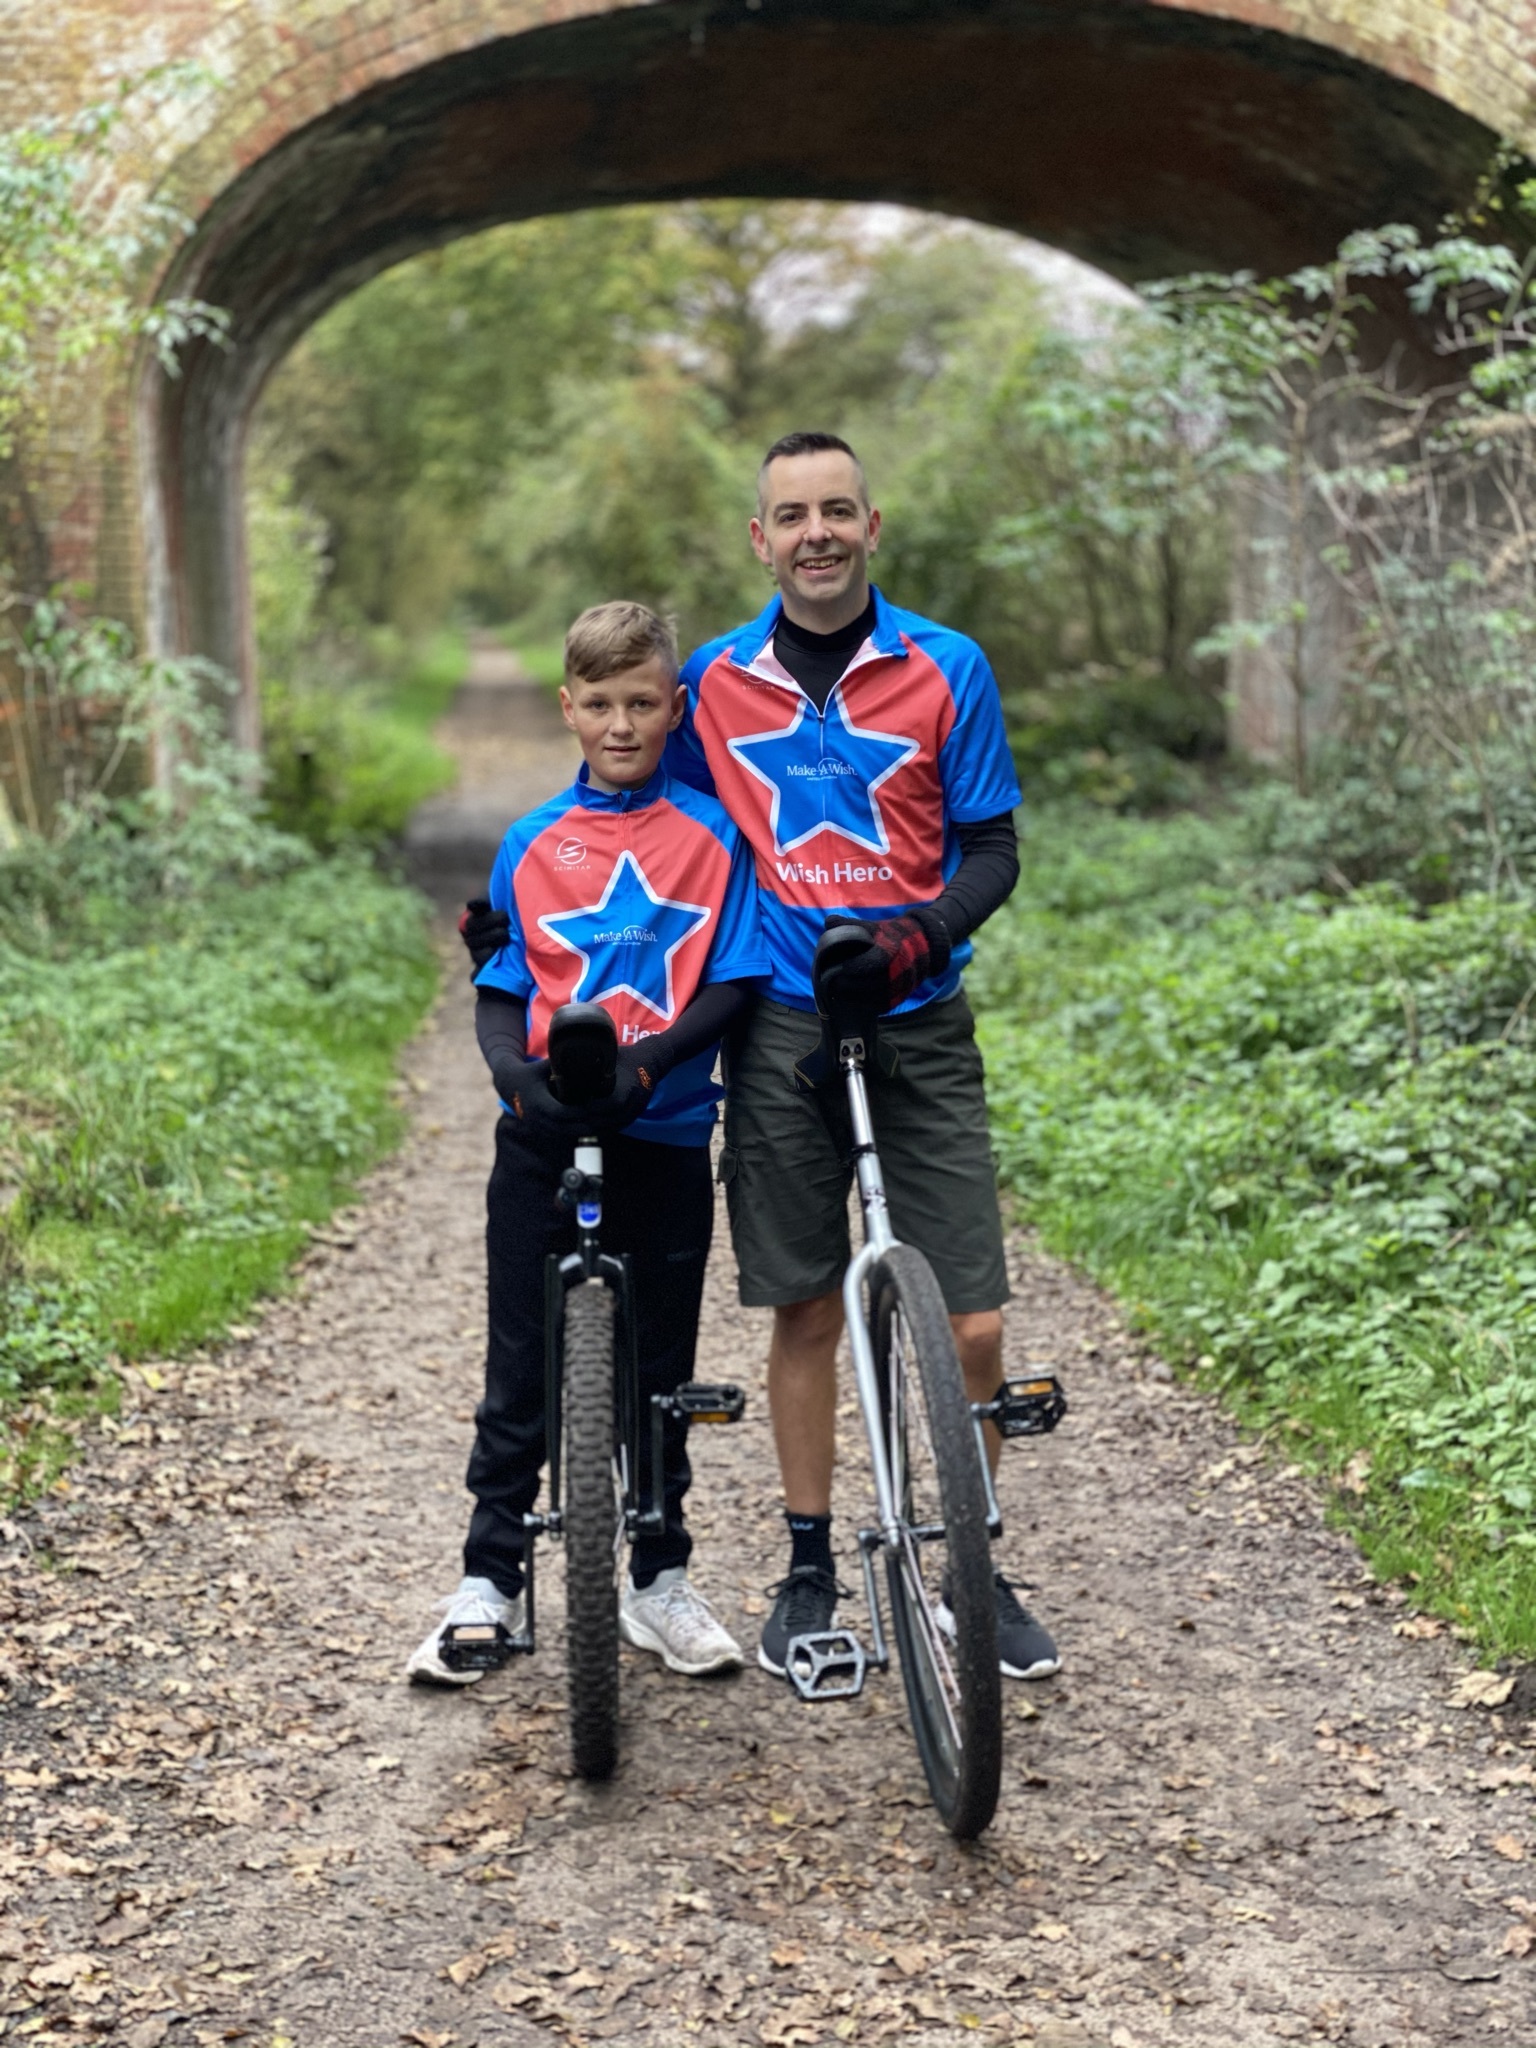 father-and-son-complete-epic-17mile-ride-on-unicycles